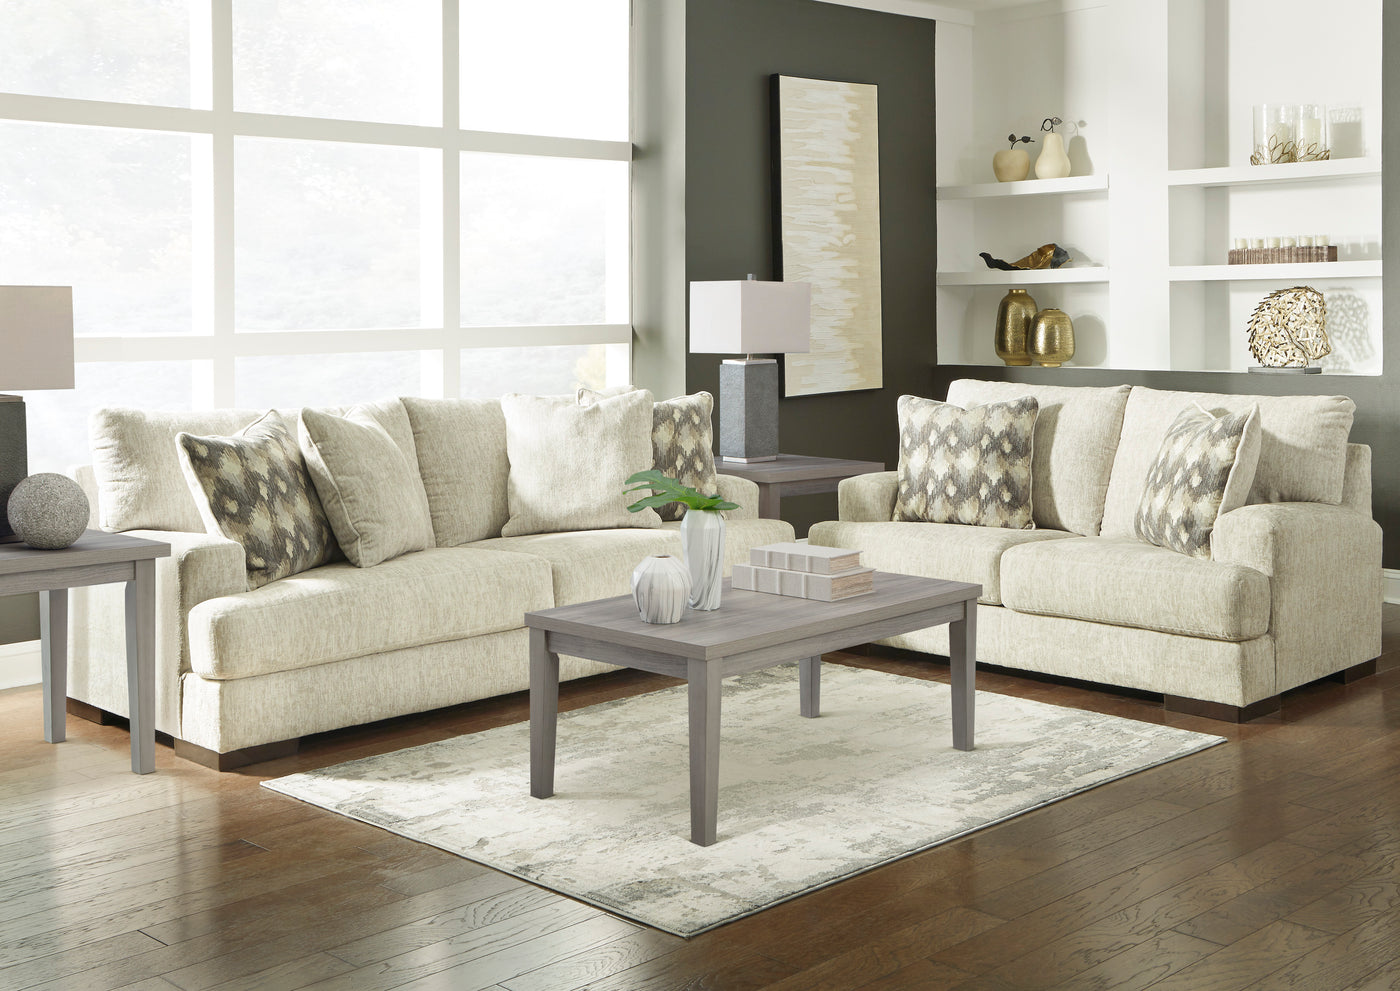 Shop the Look - Take home the Mercado Sofa and Loveseat plus this lovely occasion table set, lamps and area rug! We offer a wide range of living room furniture and accessories at JR Furniture Store in Fayetteville, NC 28311